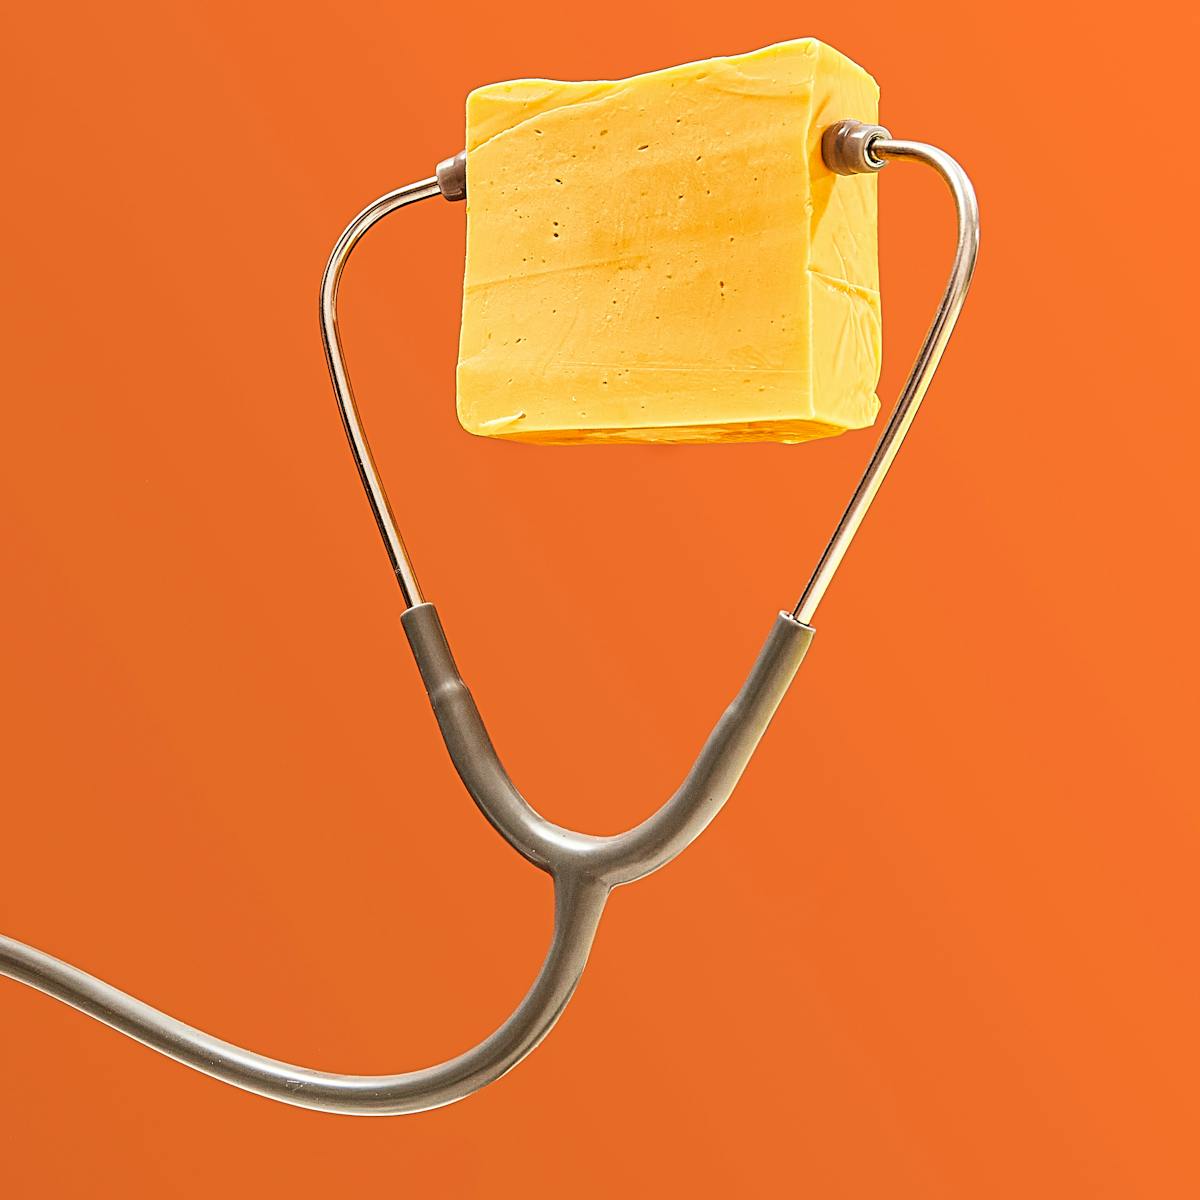 Photograph of a grey and silver stethoscope floating in front of a bright orange background, the tubing curling in a snake-like shape. The chest-piece is just out of frame. Between the earpieces is a large rectangular block of unwrapped yellow cheddar cheese. 